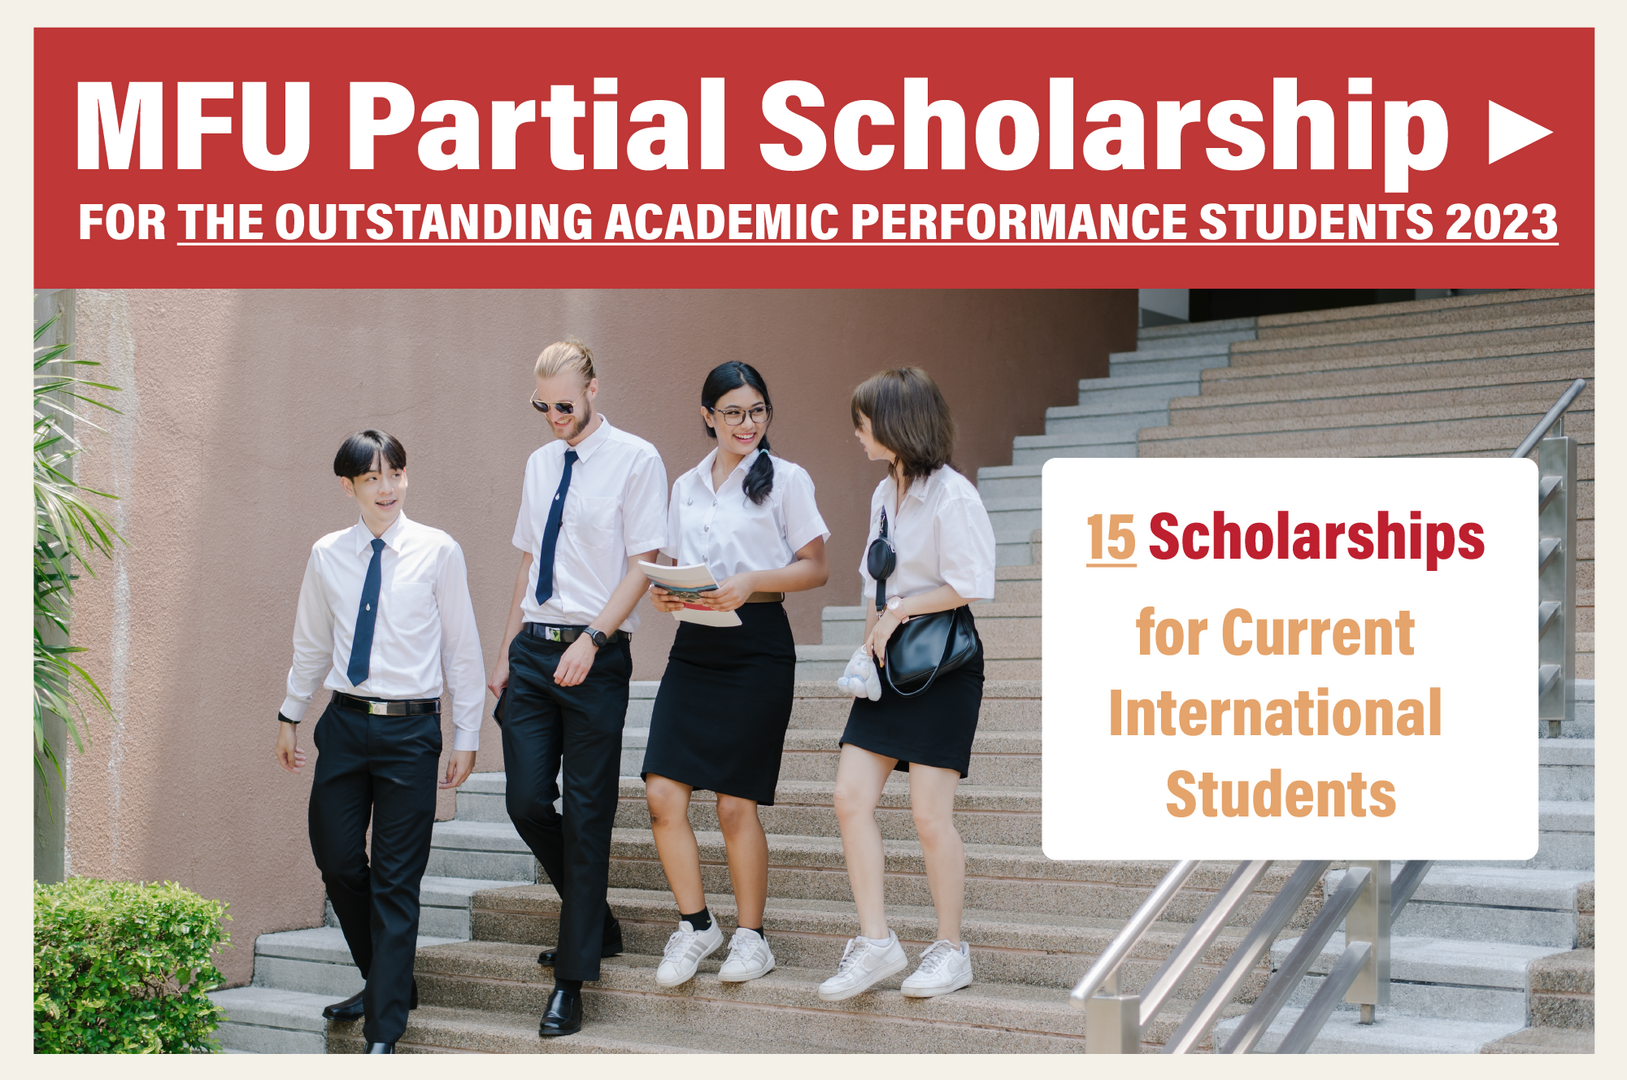 MFU Partial Scholarship for the Outstanding Academic Performance Students 2023